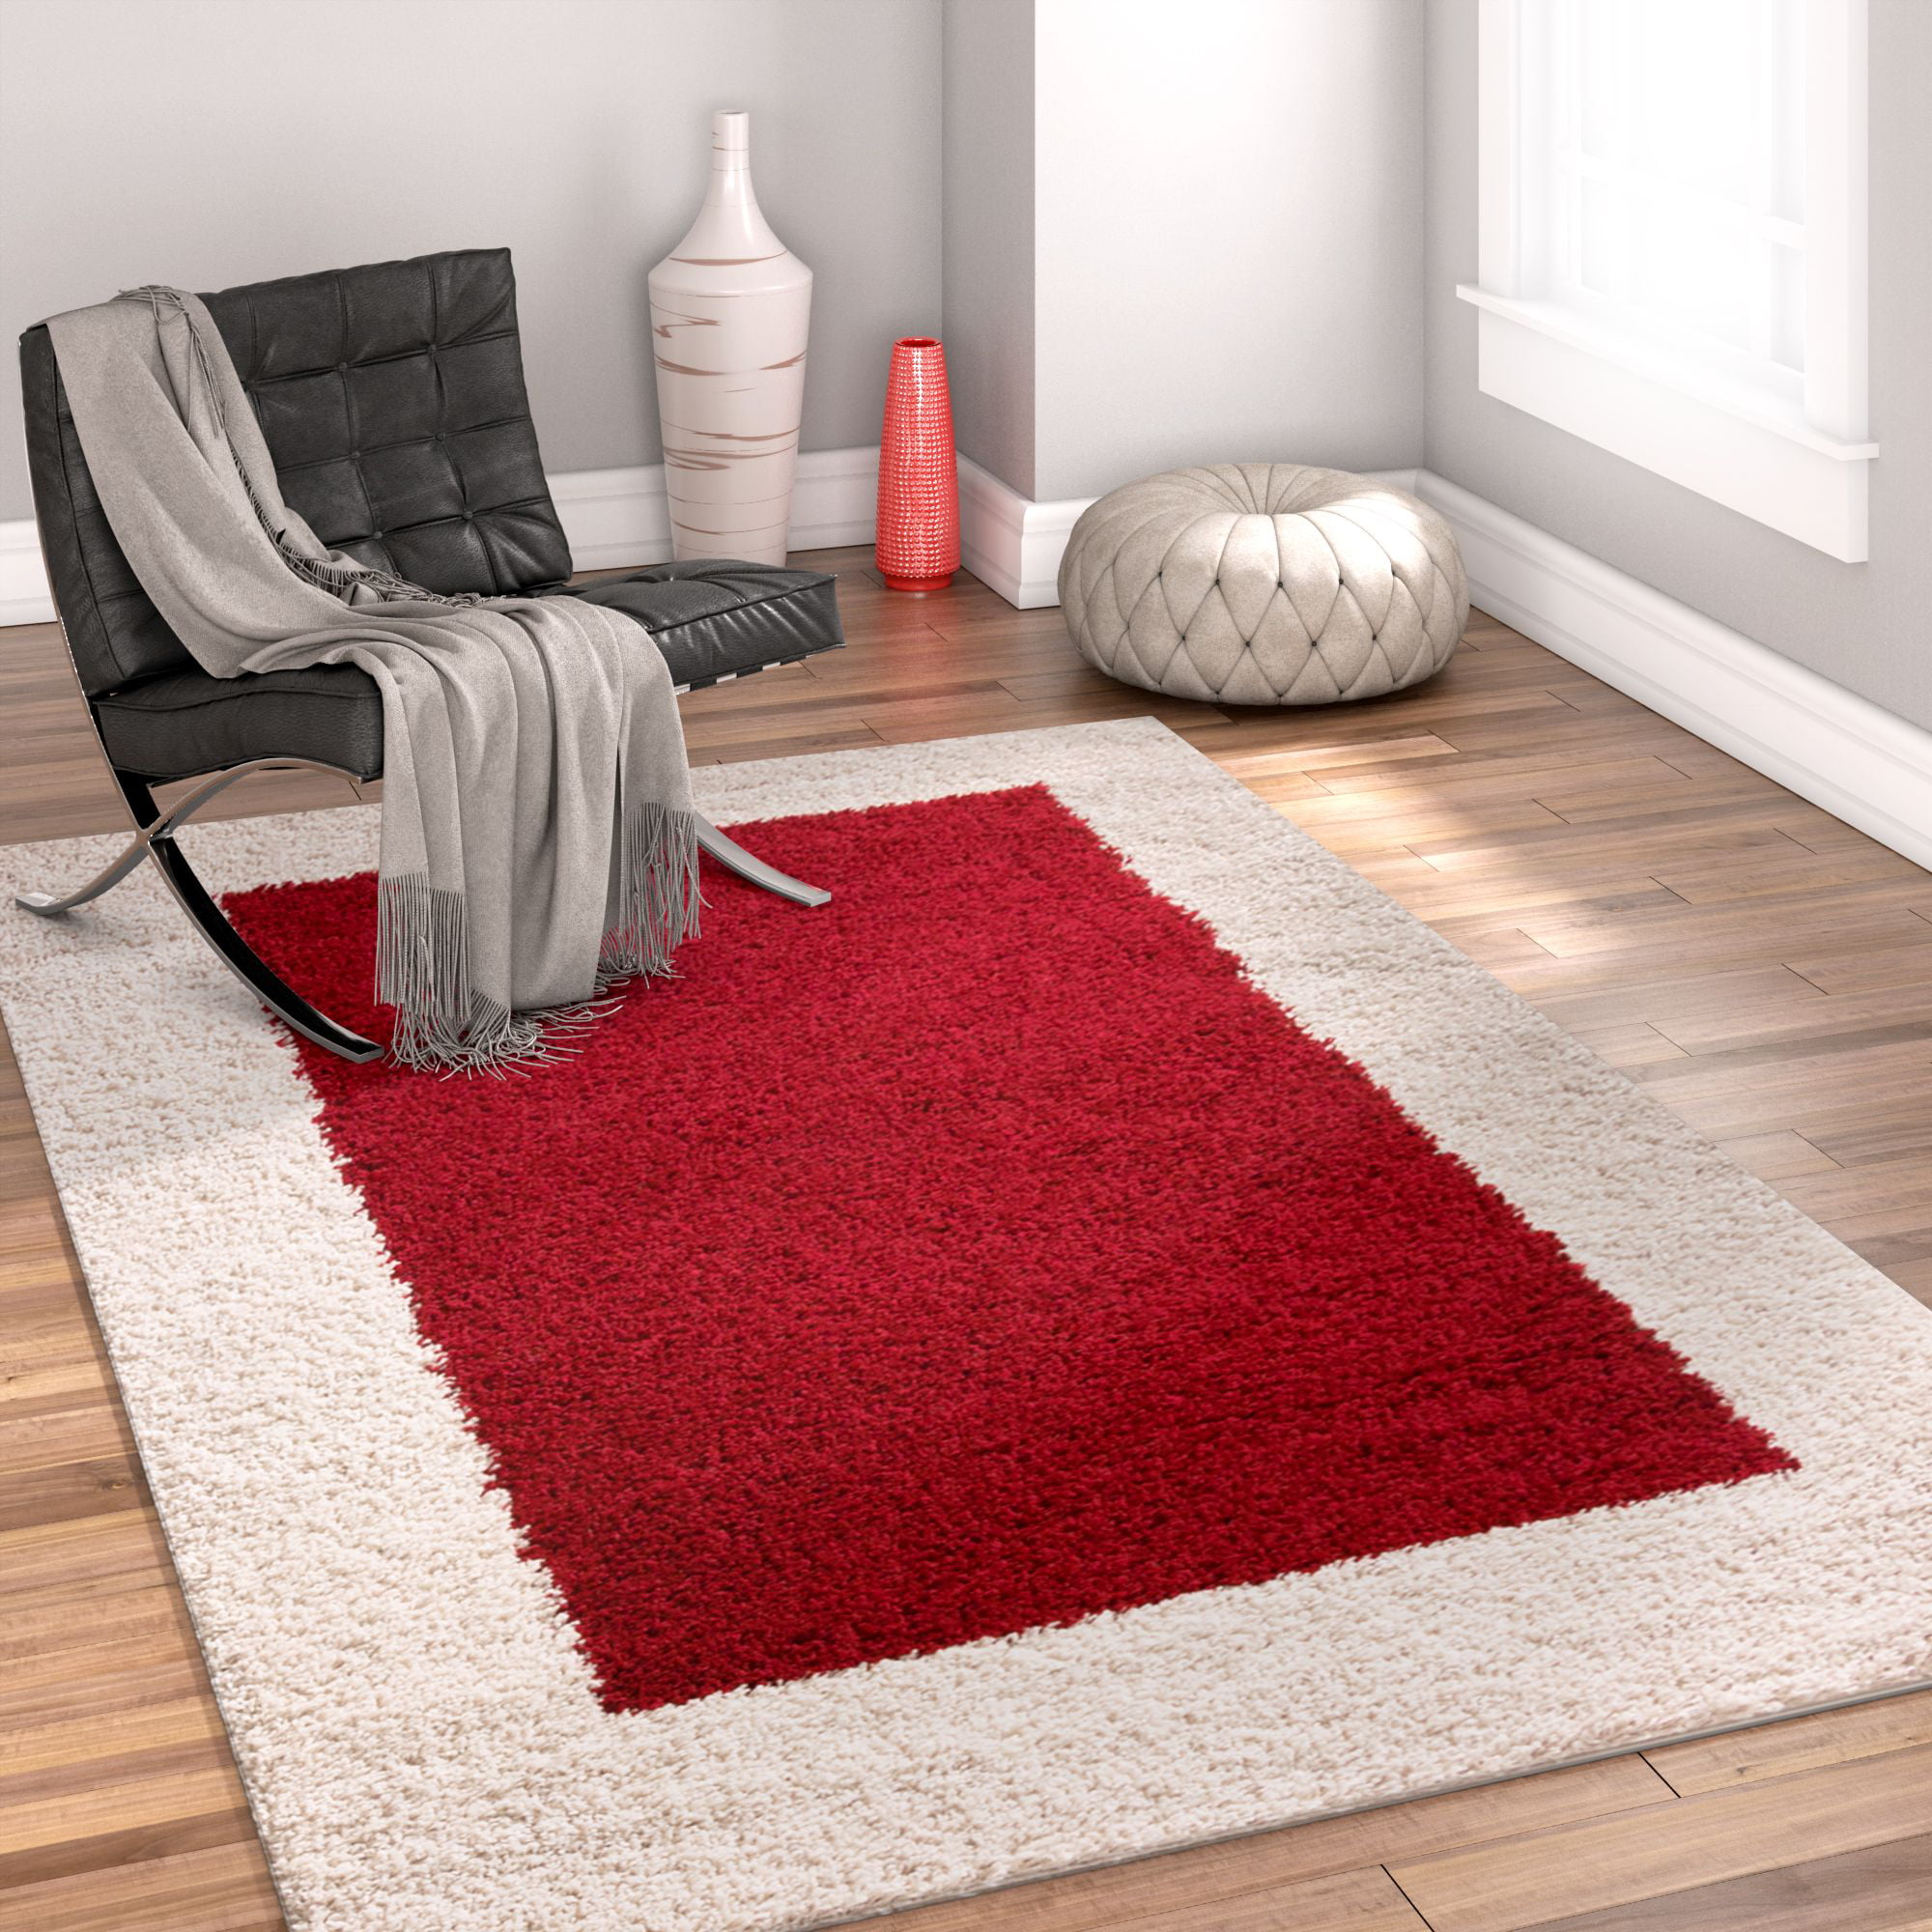 RED SCARLET RUBY LIVING ROOM RUGS SOFT NON SHED SHAGGY GEOMETRIC SMALL LARGE RUG 